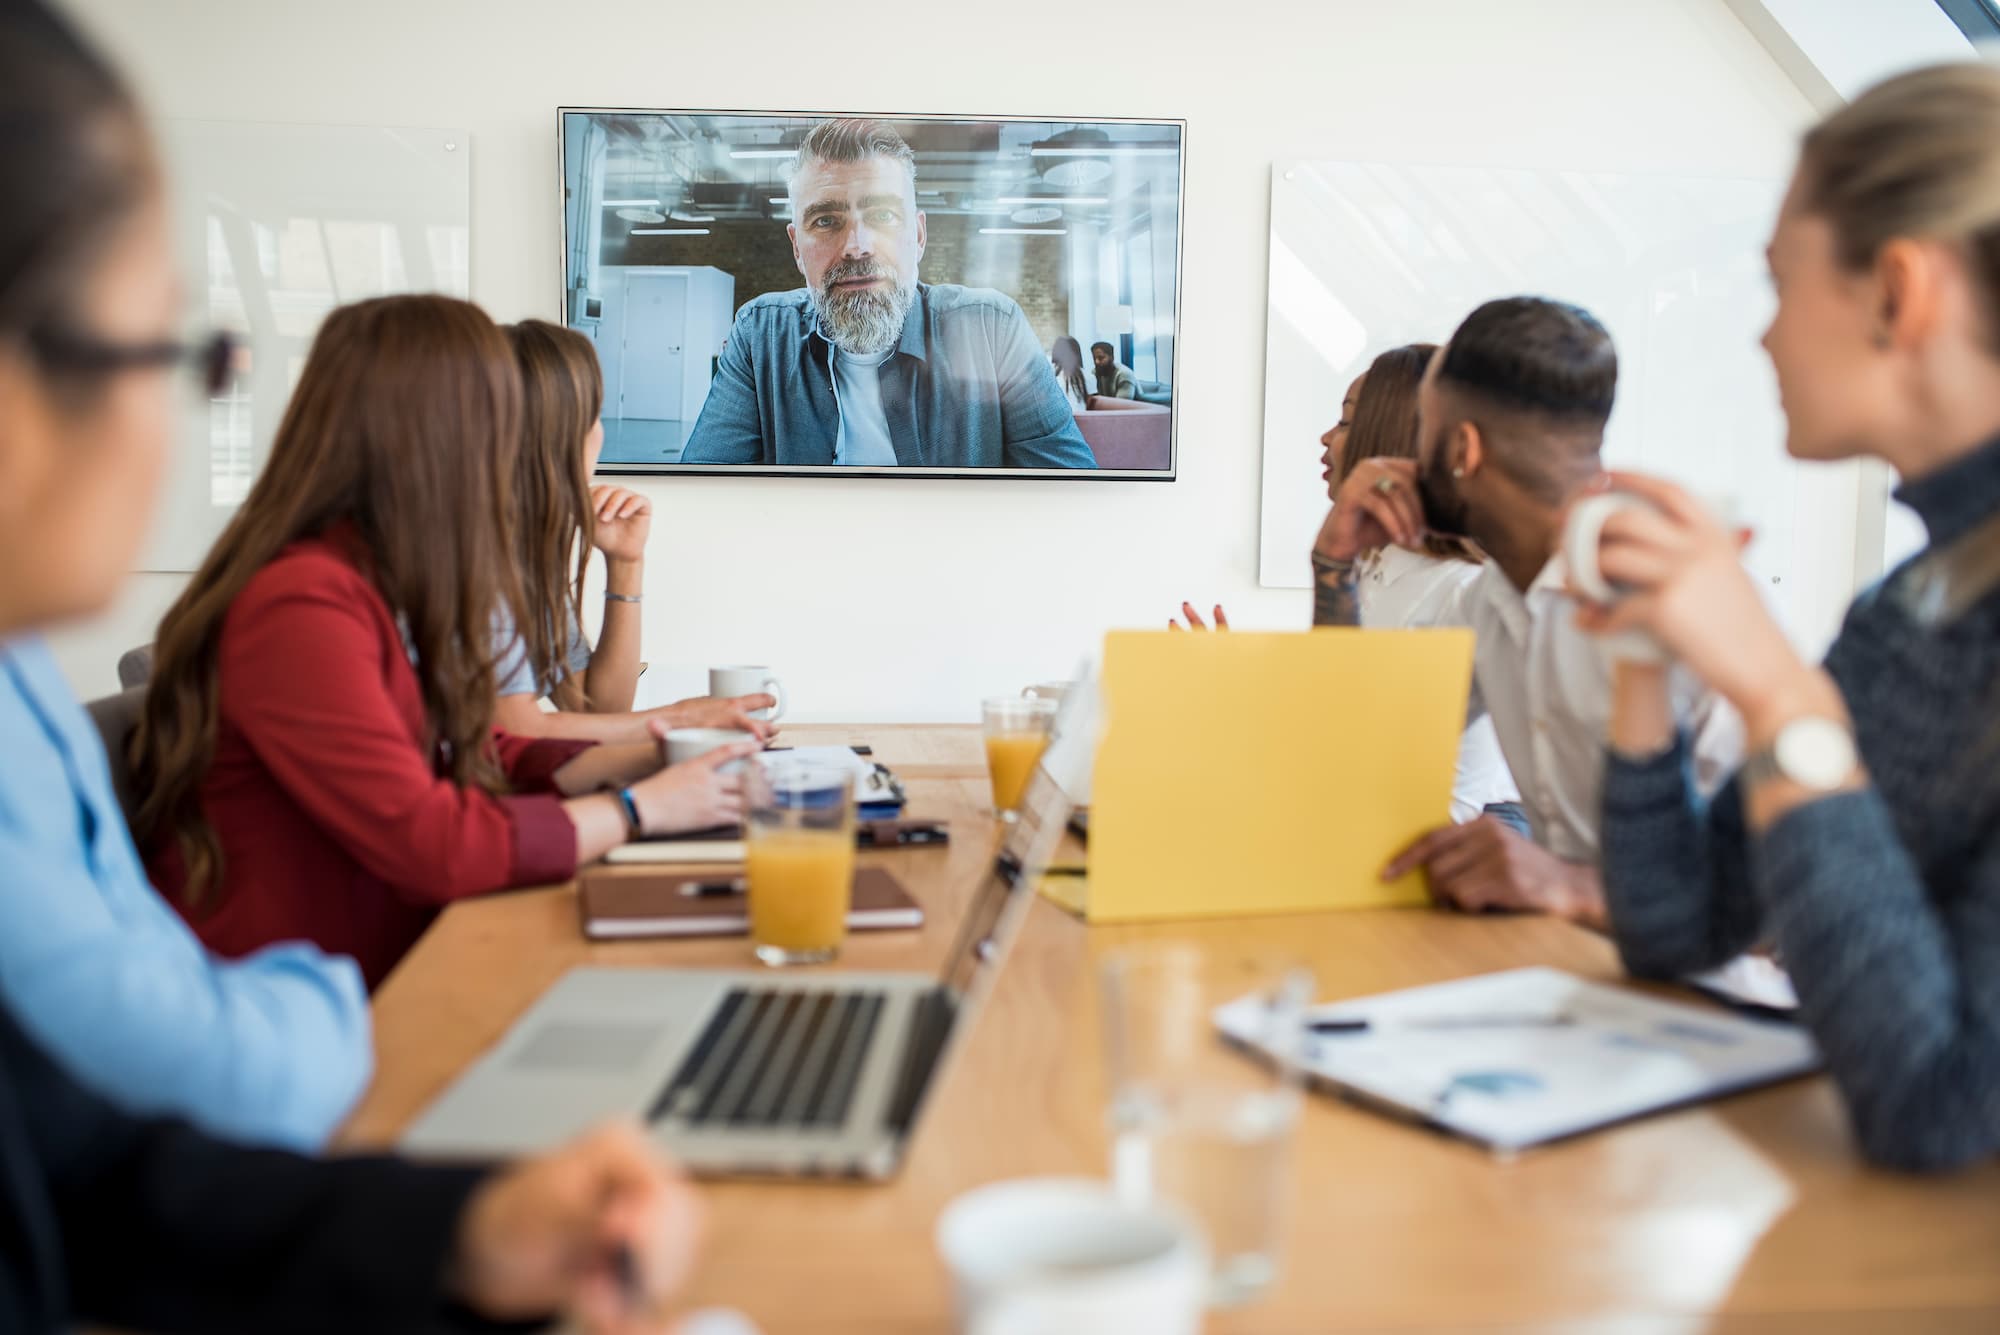 3 Tips to Help Extrovert Team Members Thrive in The Remote Workplace